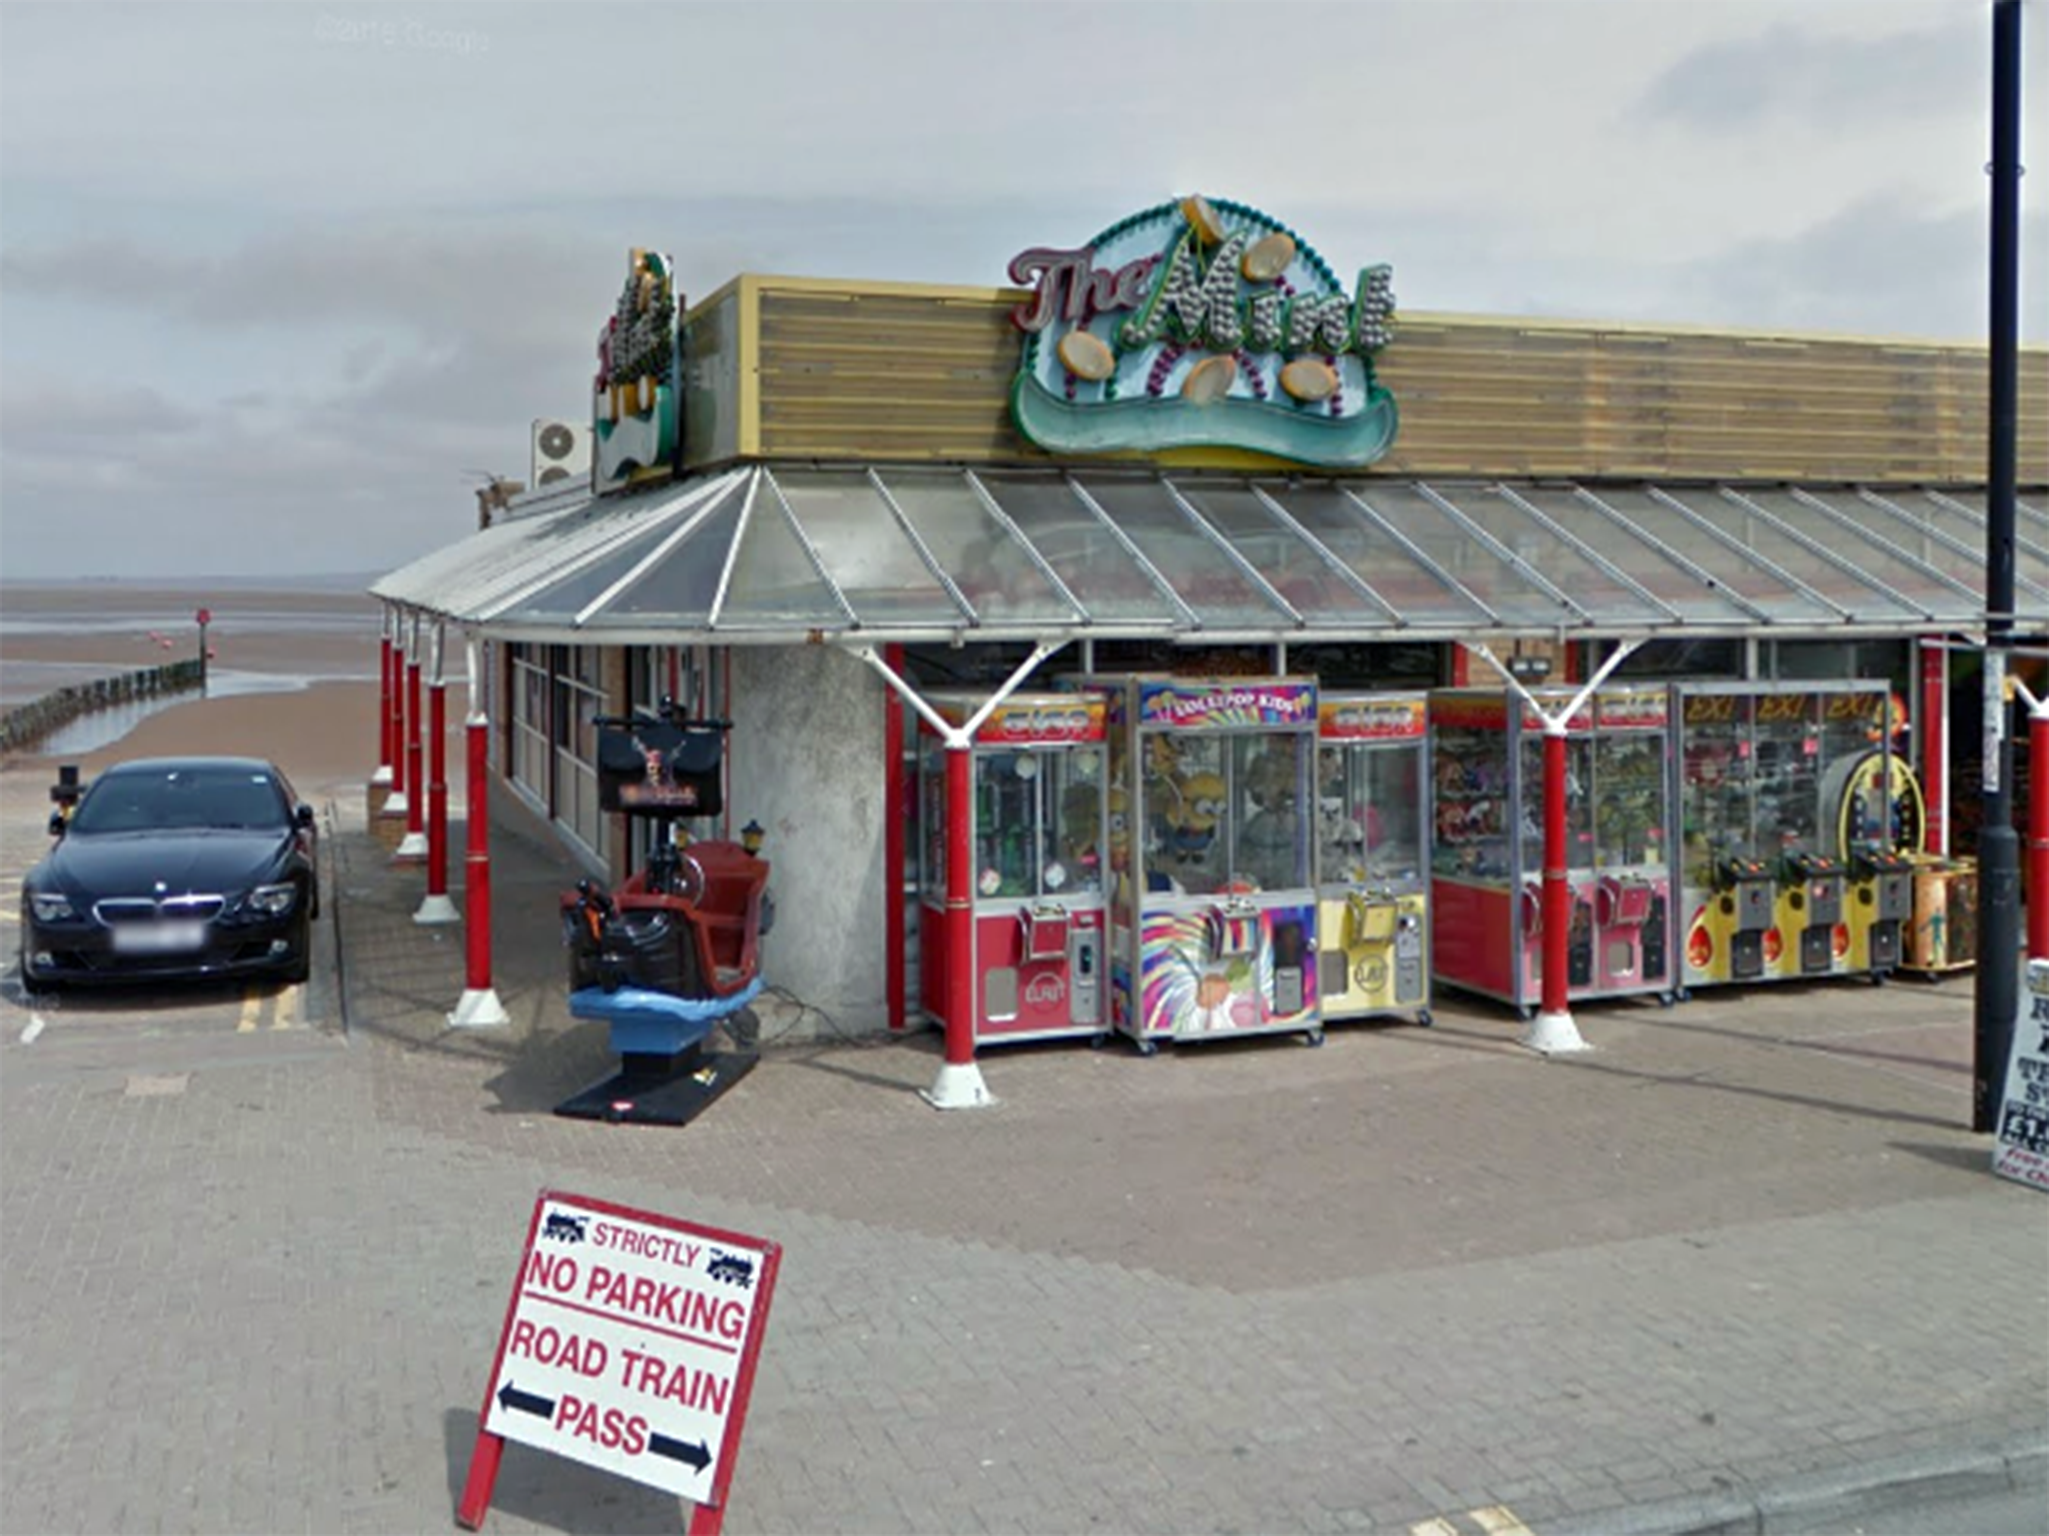 The mother said the incident took place at The Mint Arcade in Cleethorpes, Lincolnshire